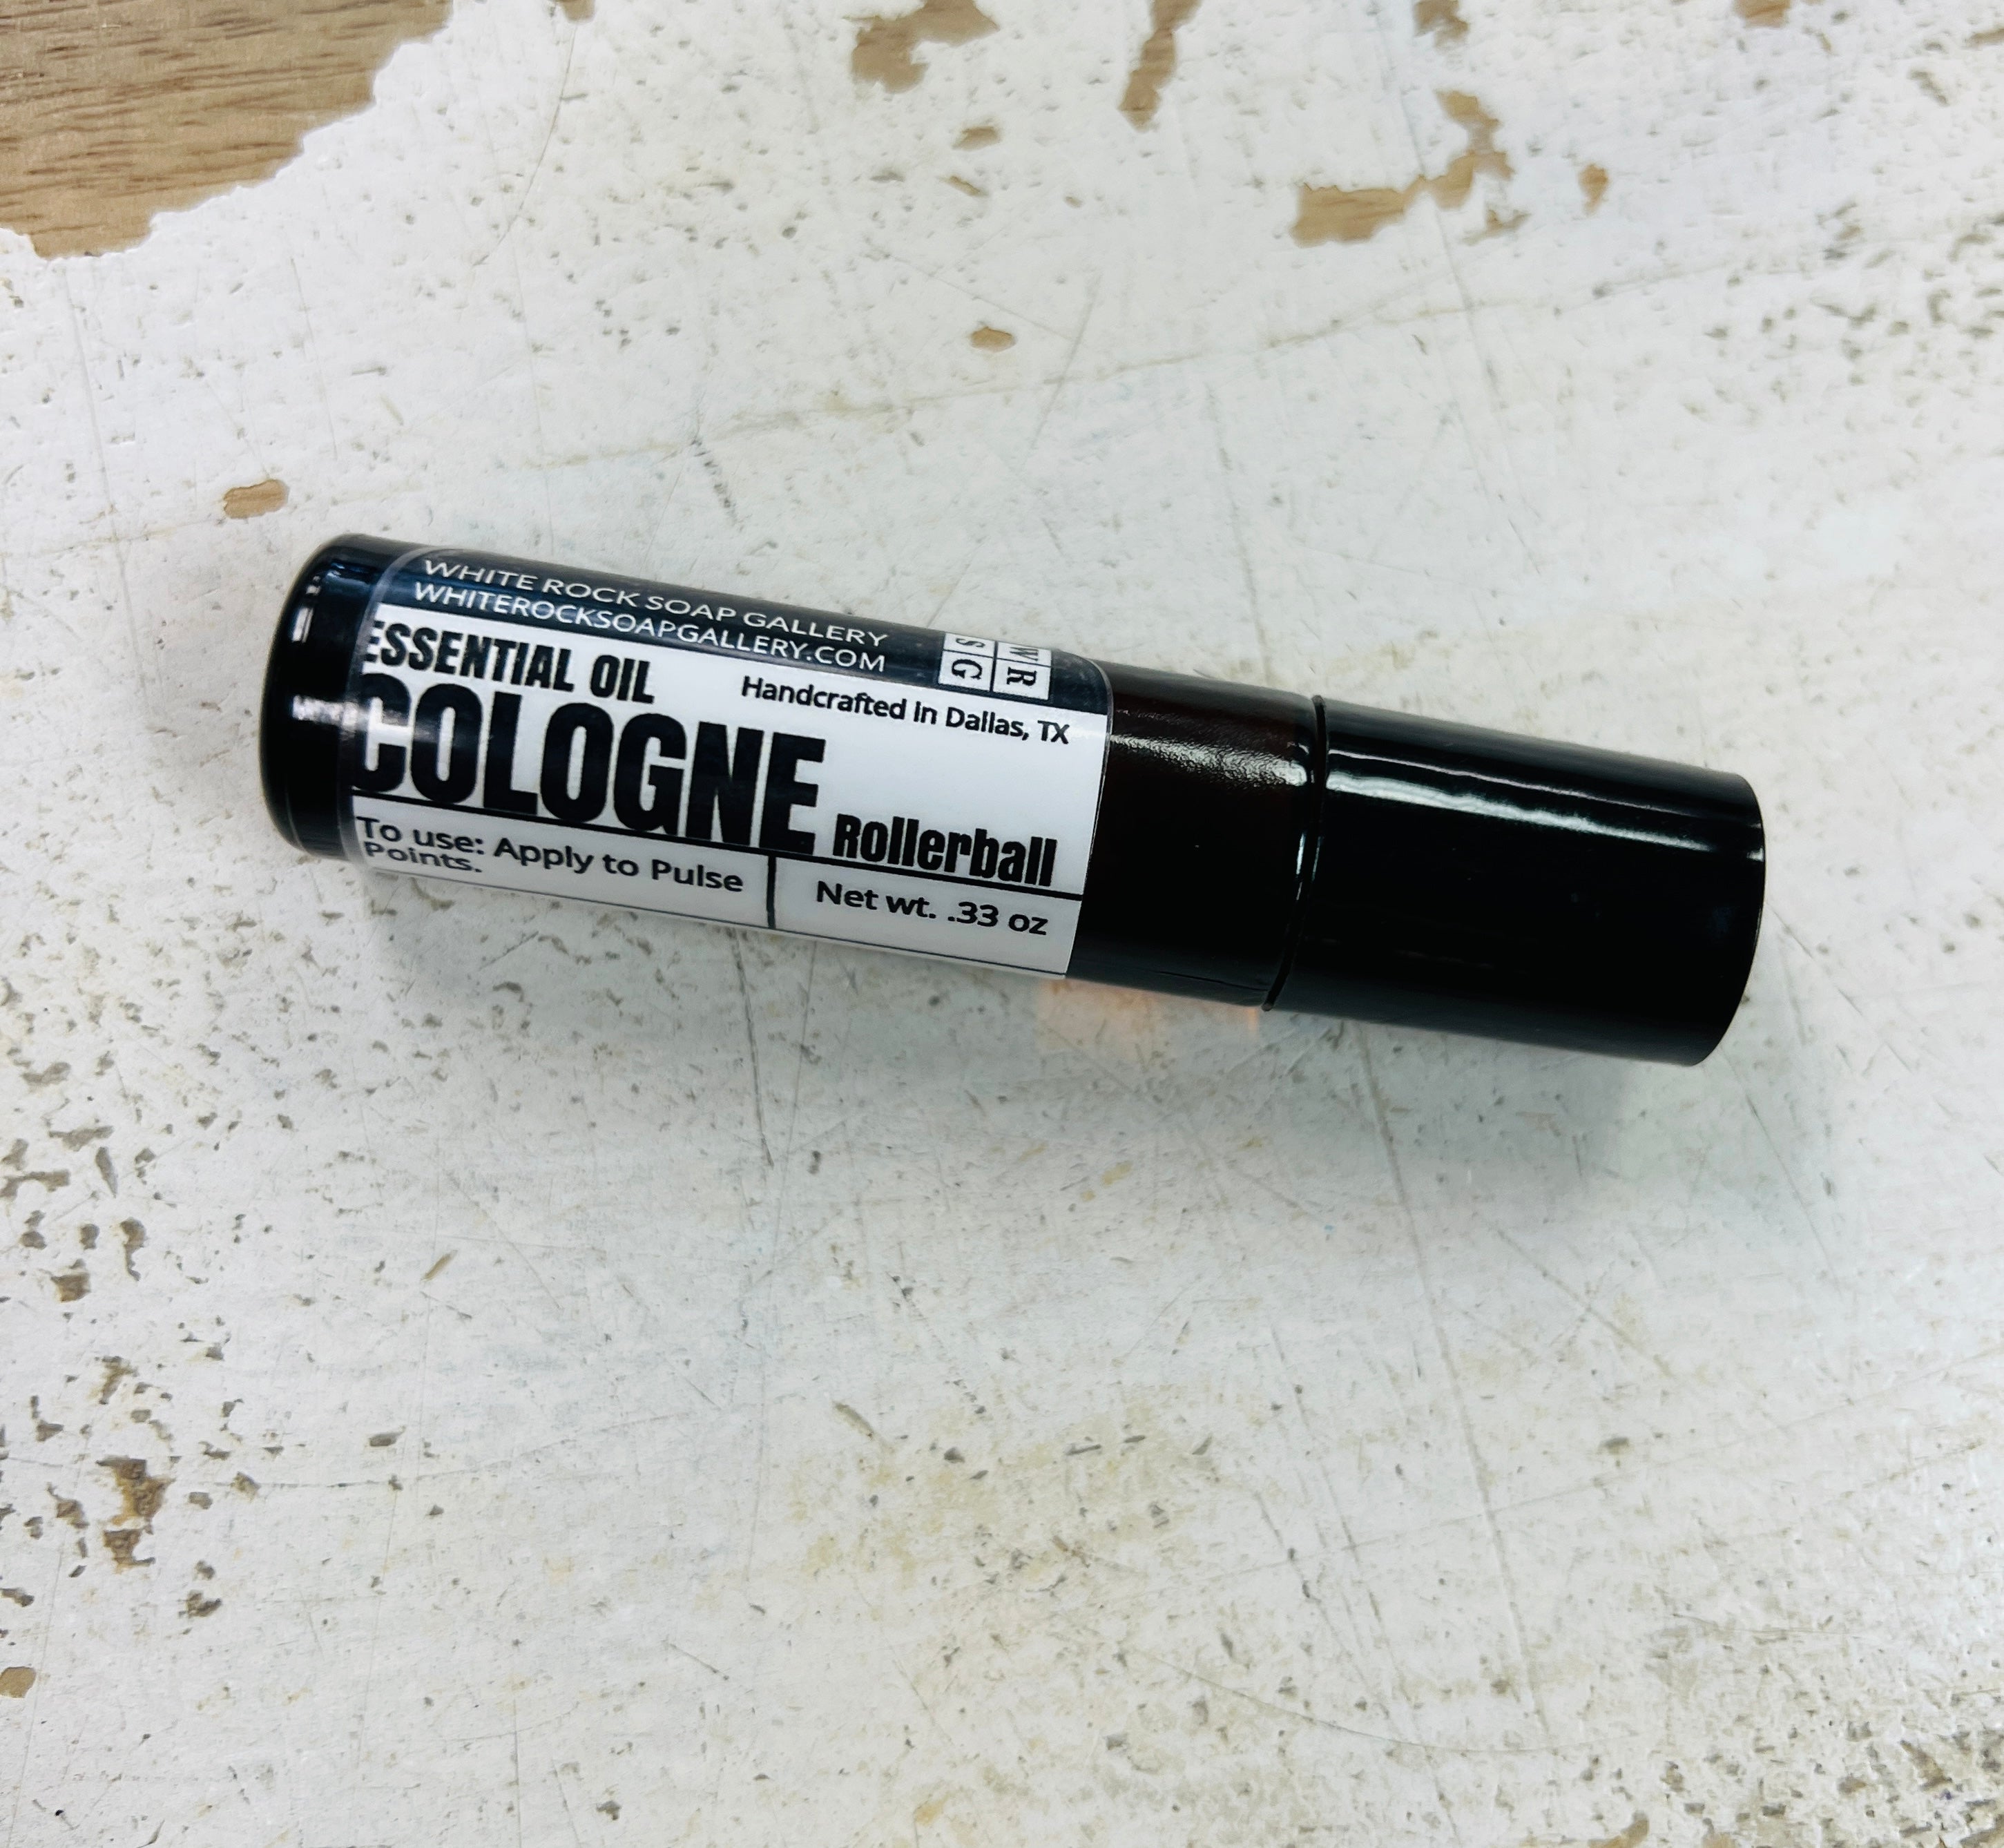 Essential Oil Cologne Rollerball